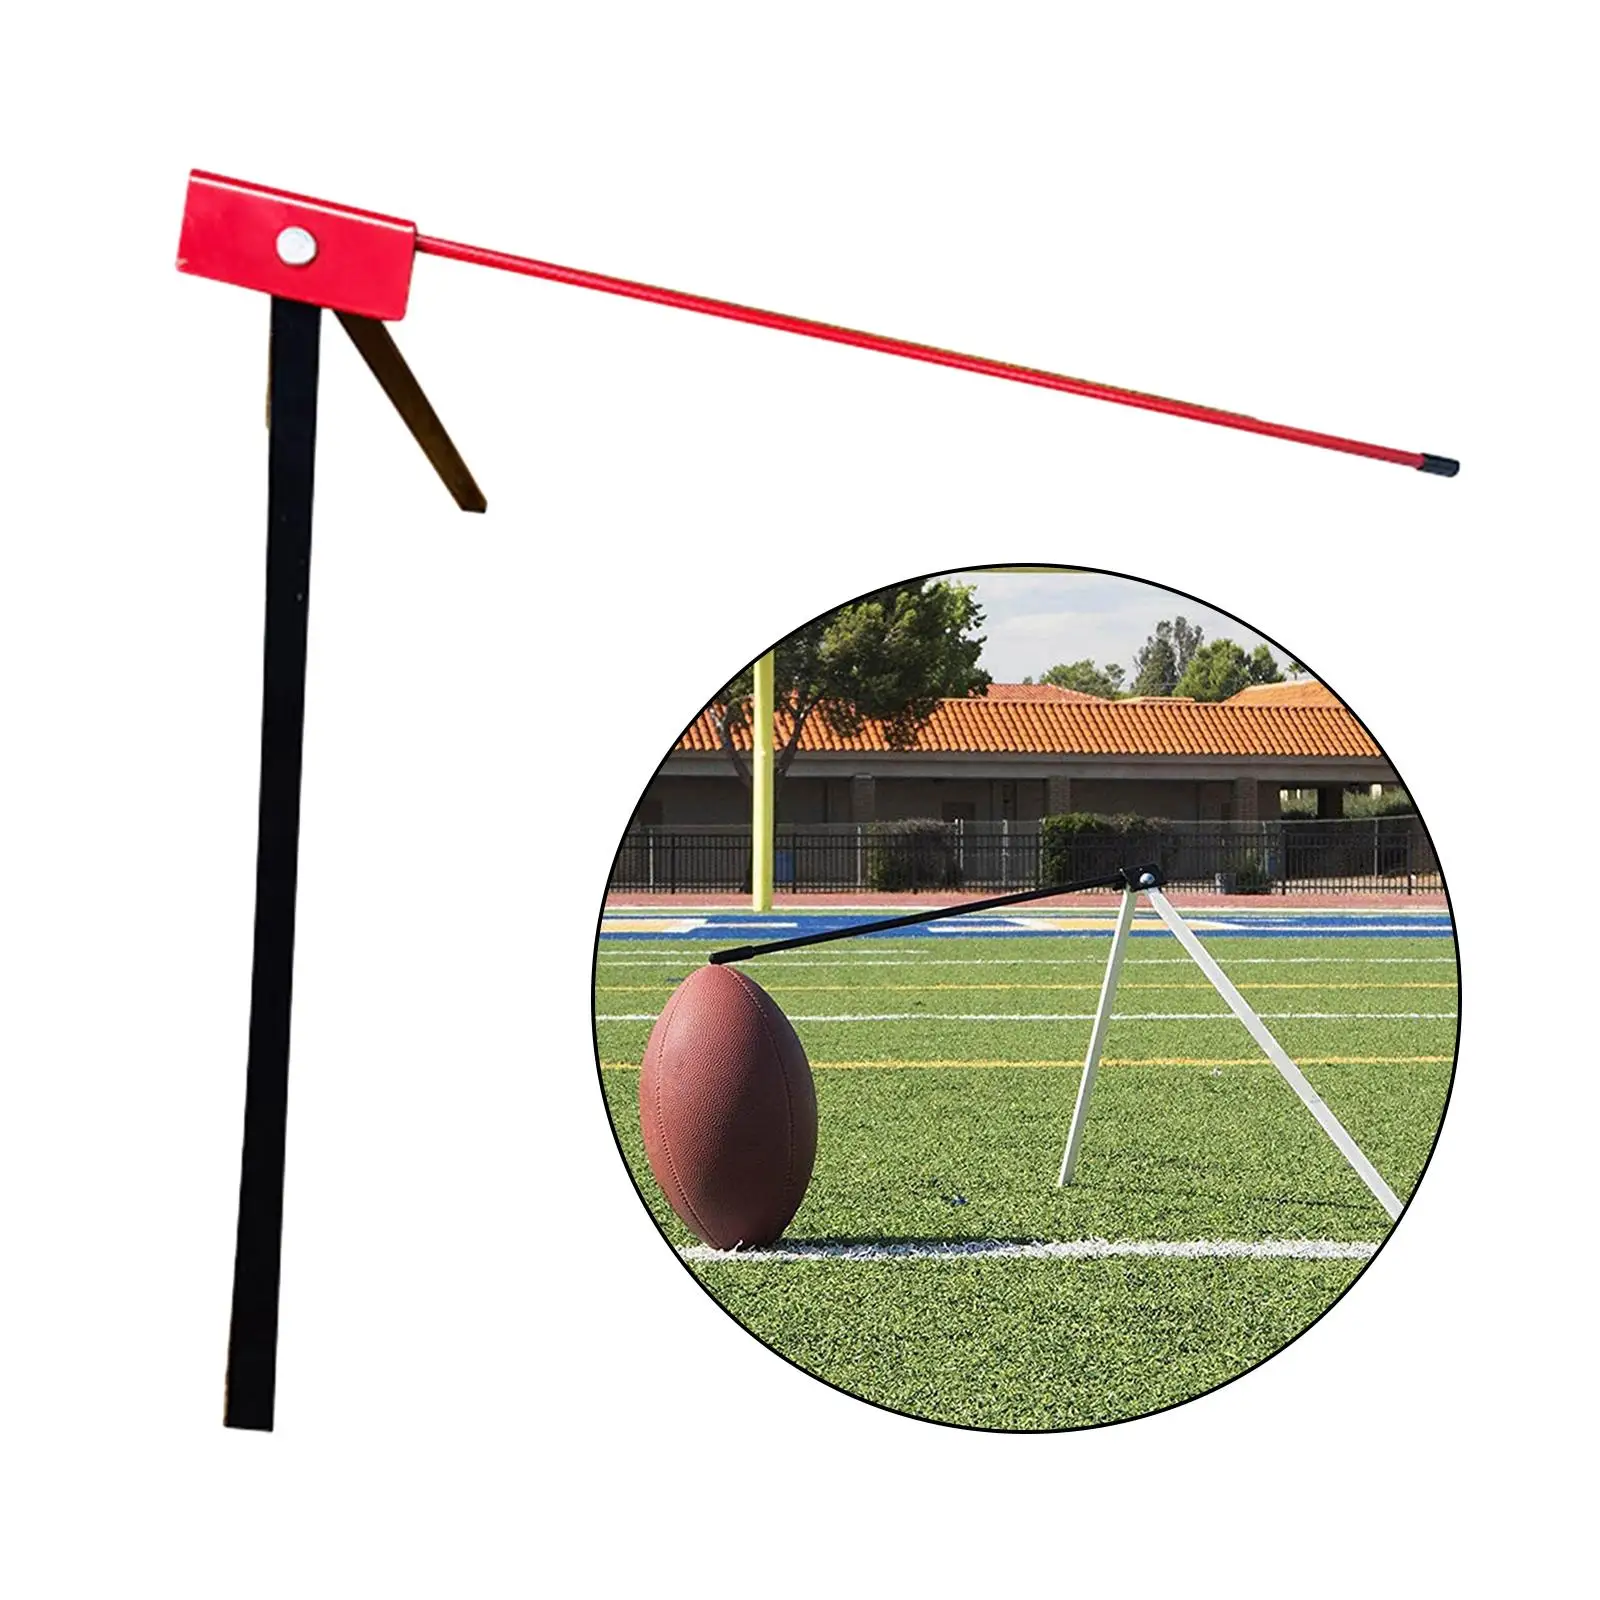 

Football Kicking Tee Stand Accessories Field Goal Kicking Holder for All Ball Sizes Soccer Training Bracket for Adults Kids